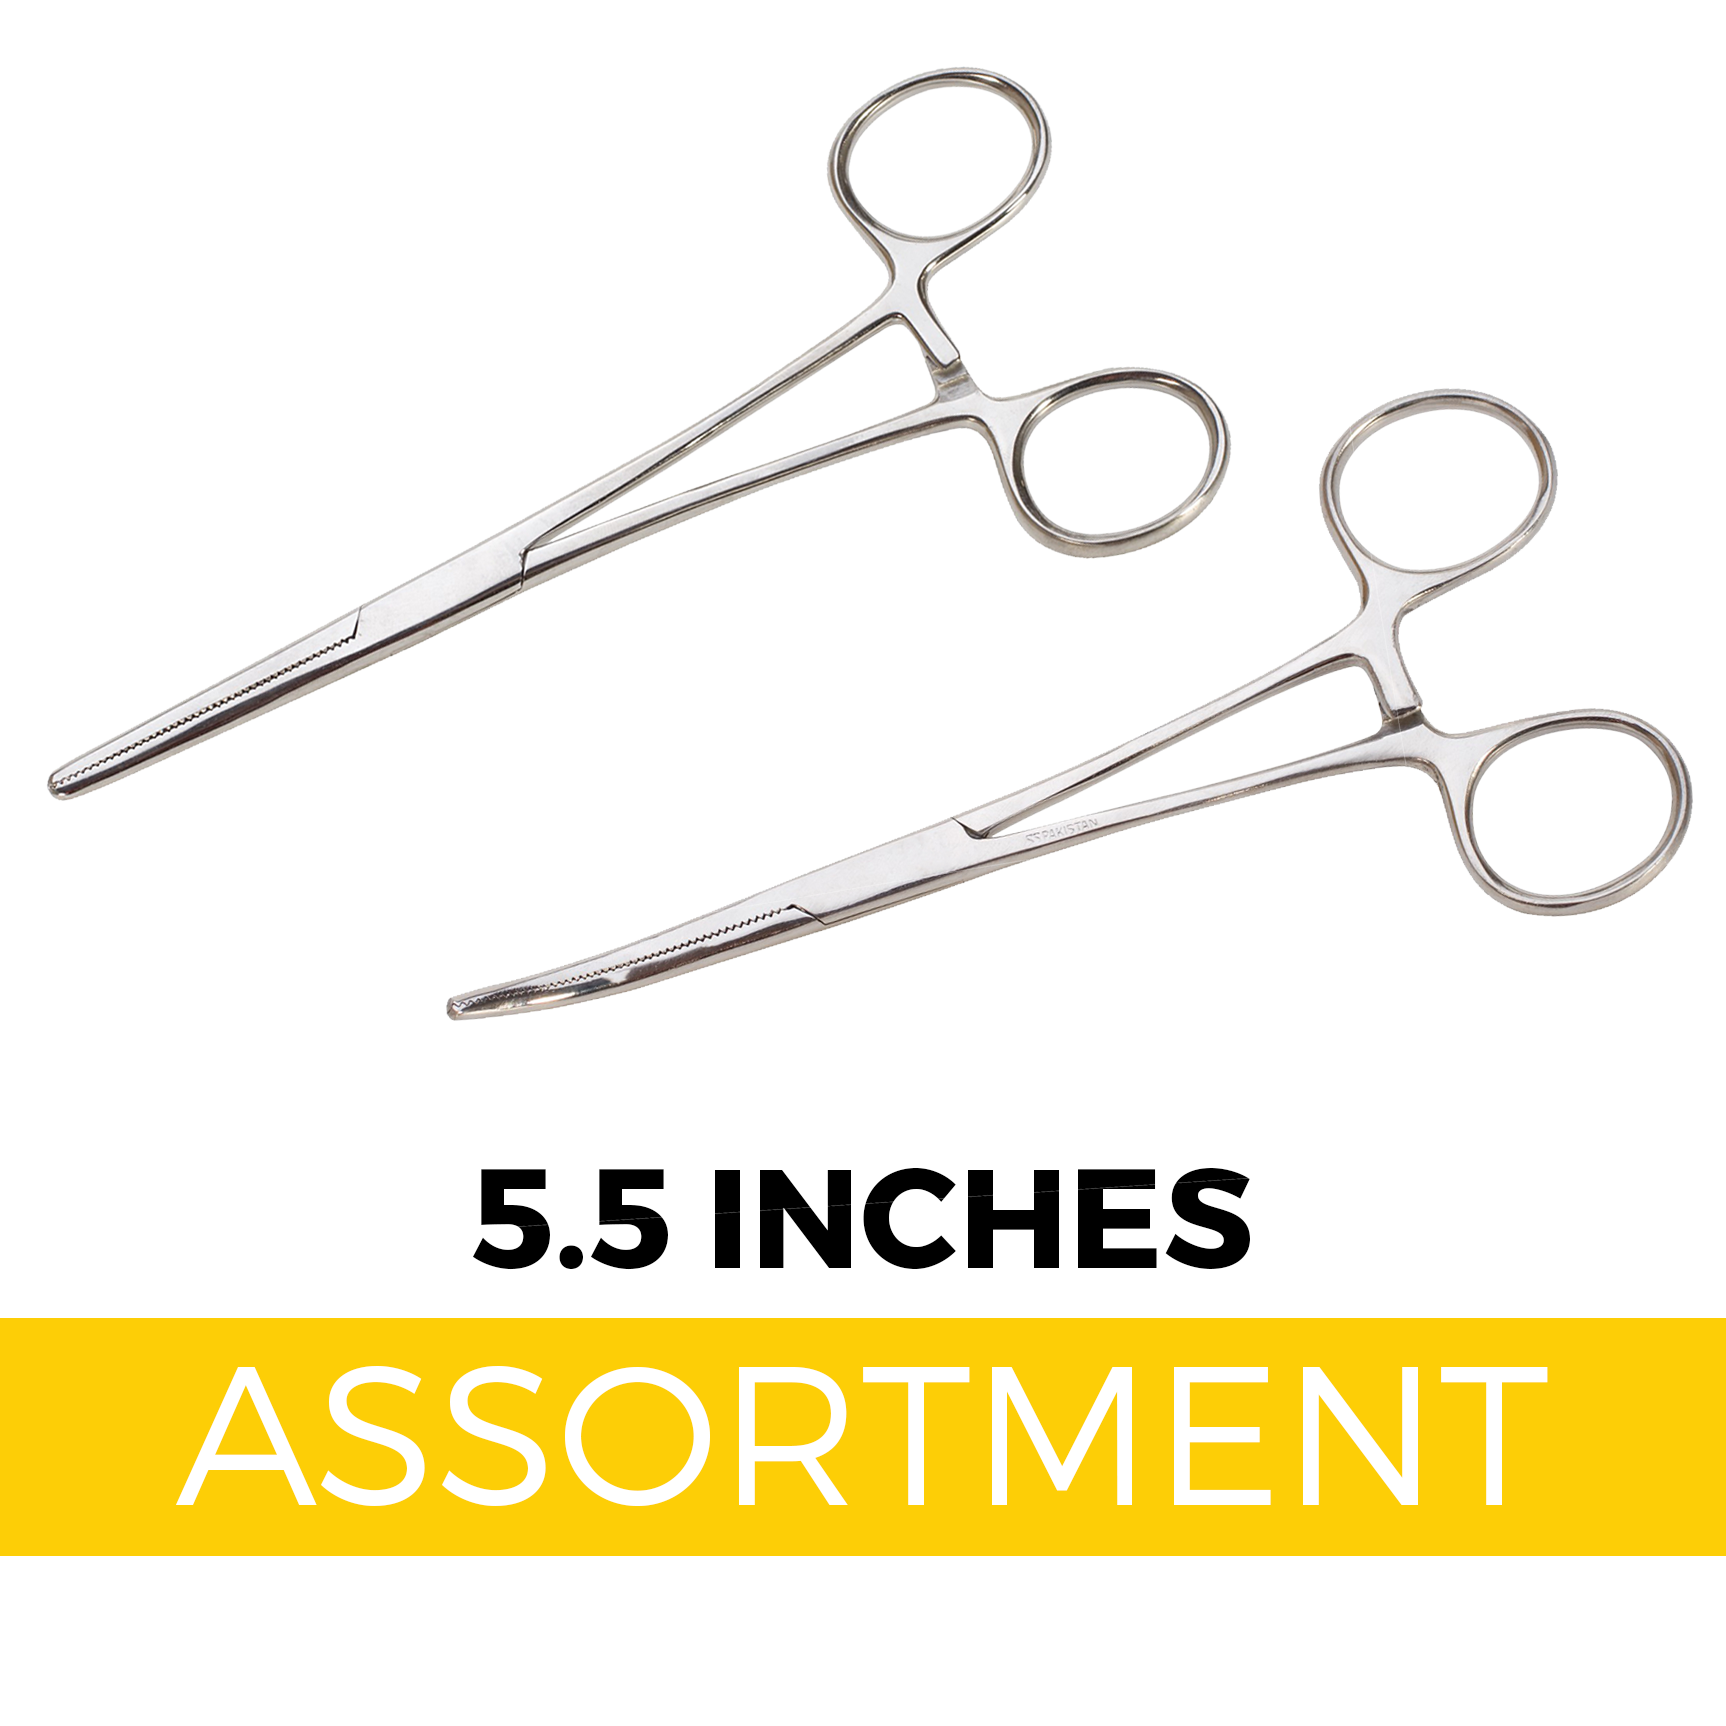 Handy Clamps - 5.5" Forceps Assortment (20 pc Display)